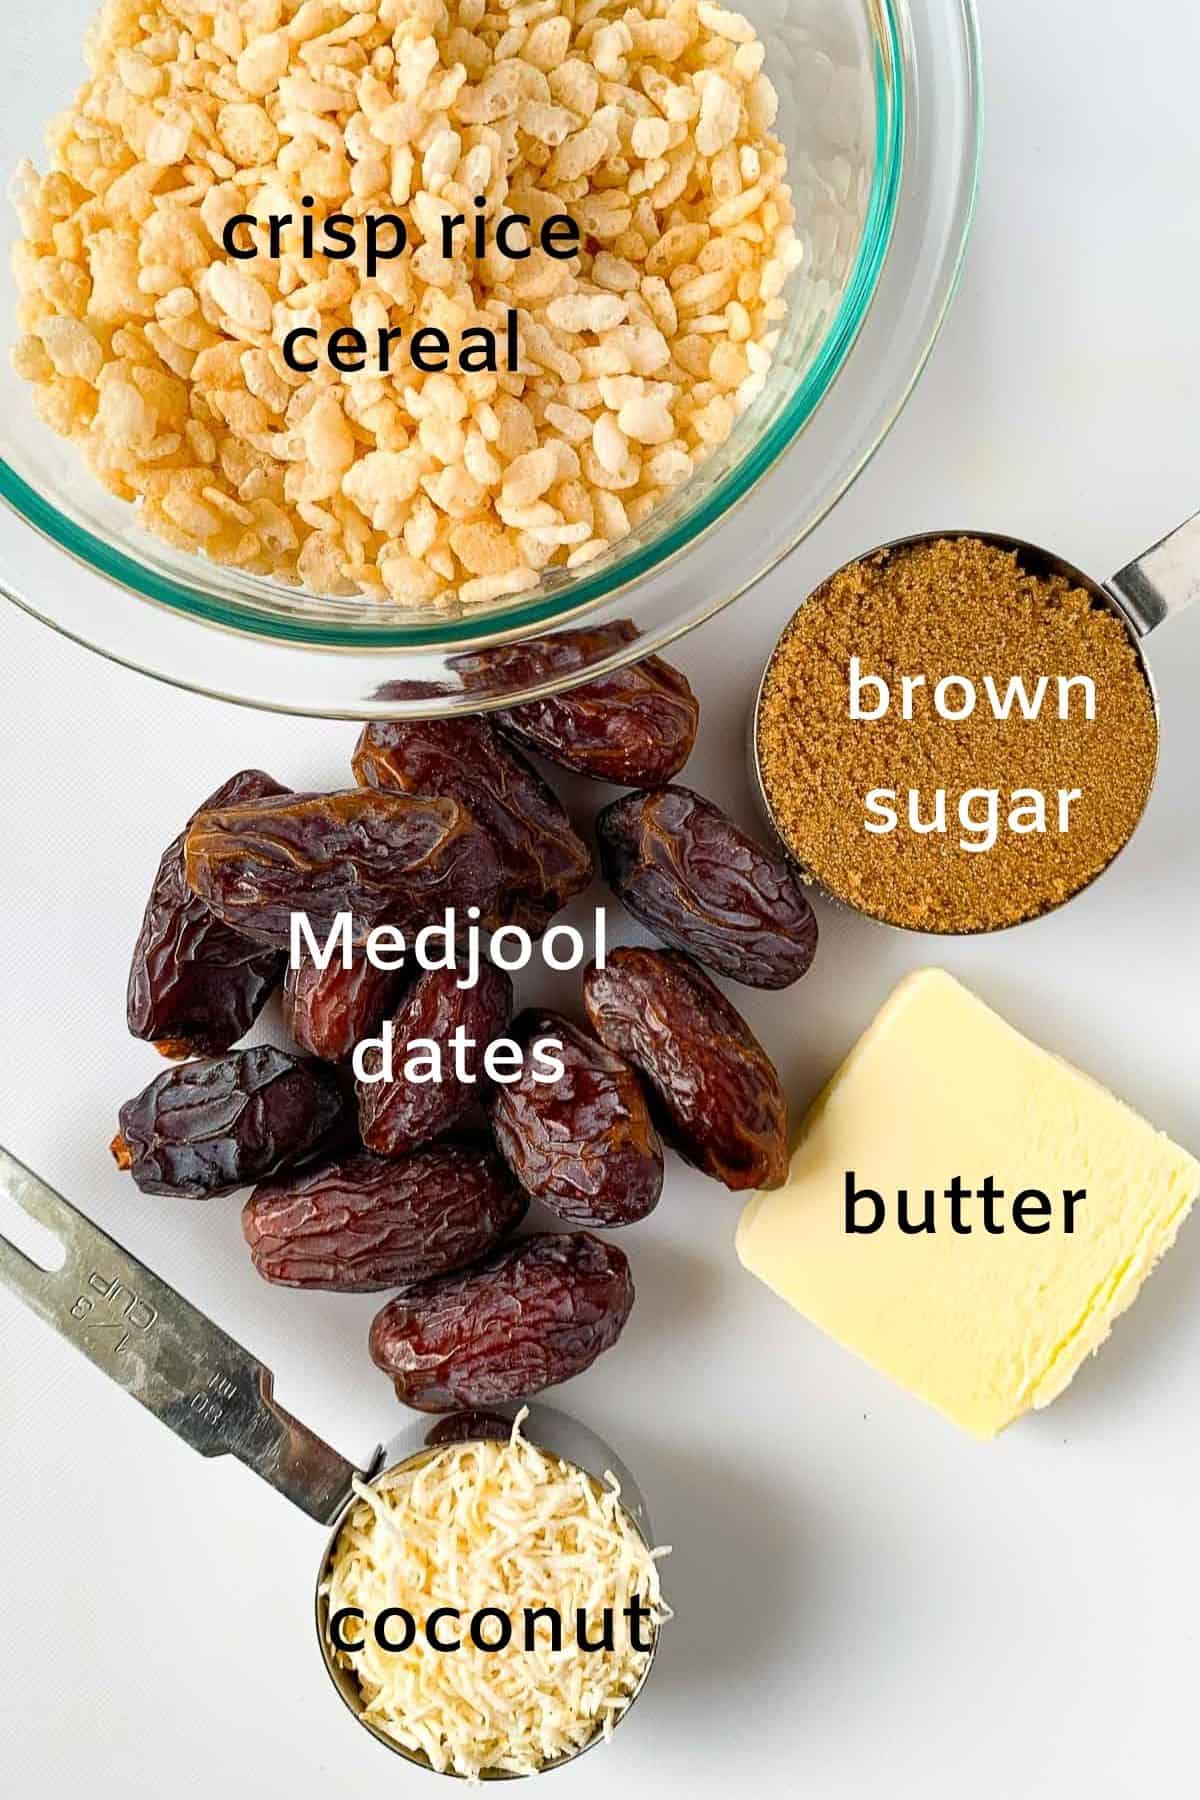 Labelled ingredients for no-bake date log candy.